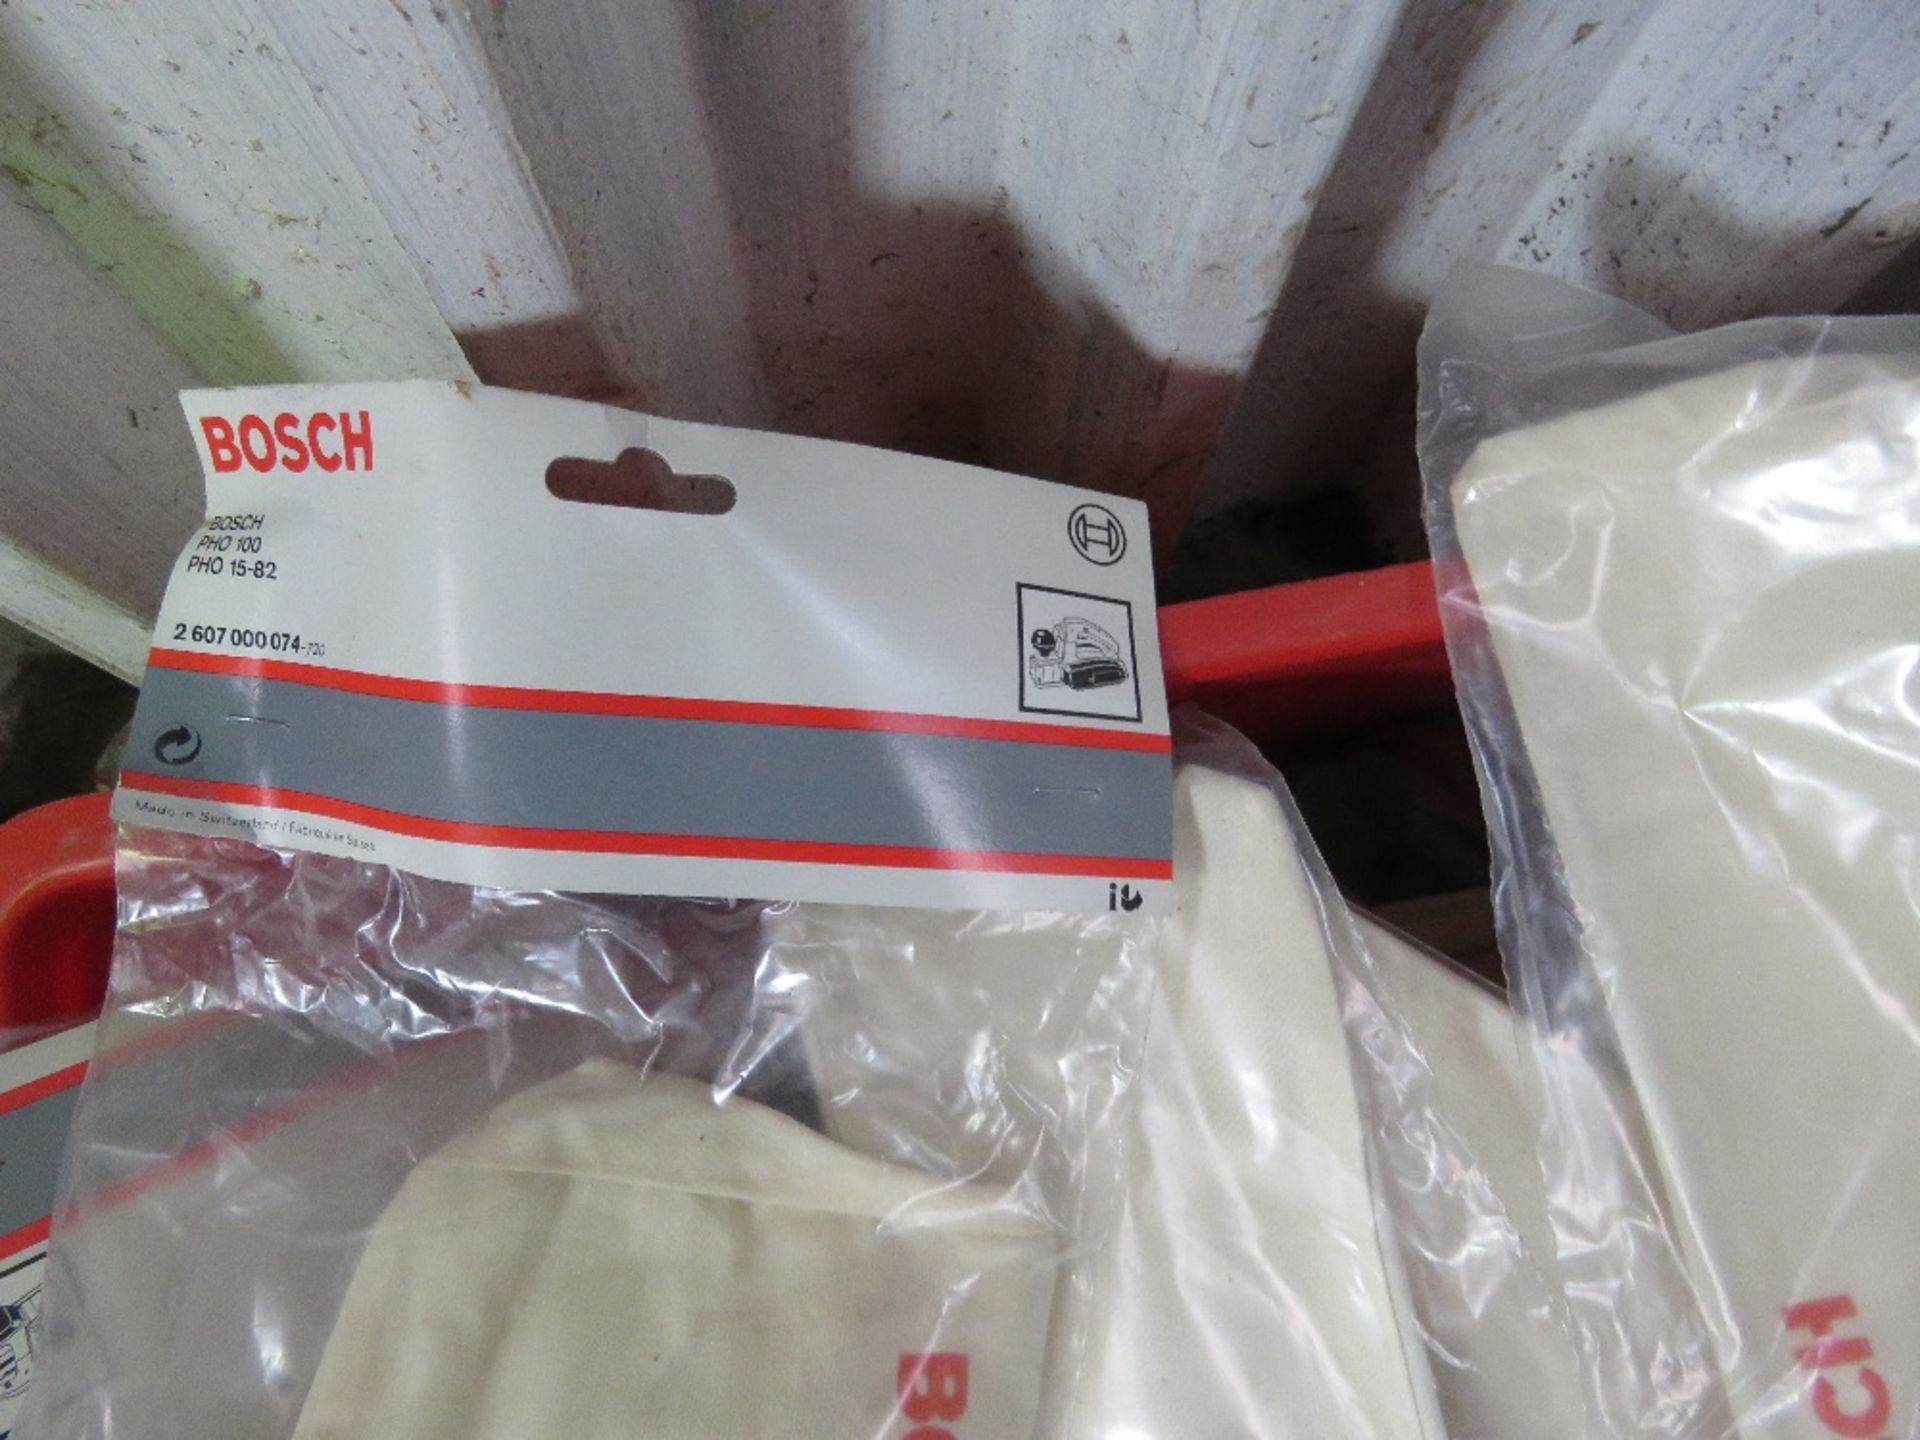 UNUSED BOSCH DUST COLLECTING BAGS. - Image 2 of 3